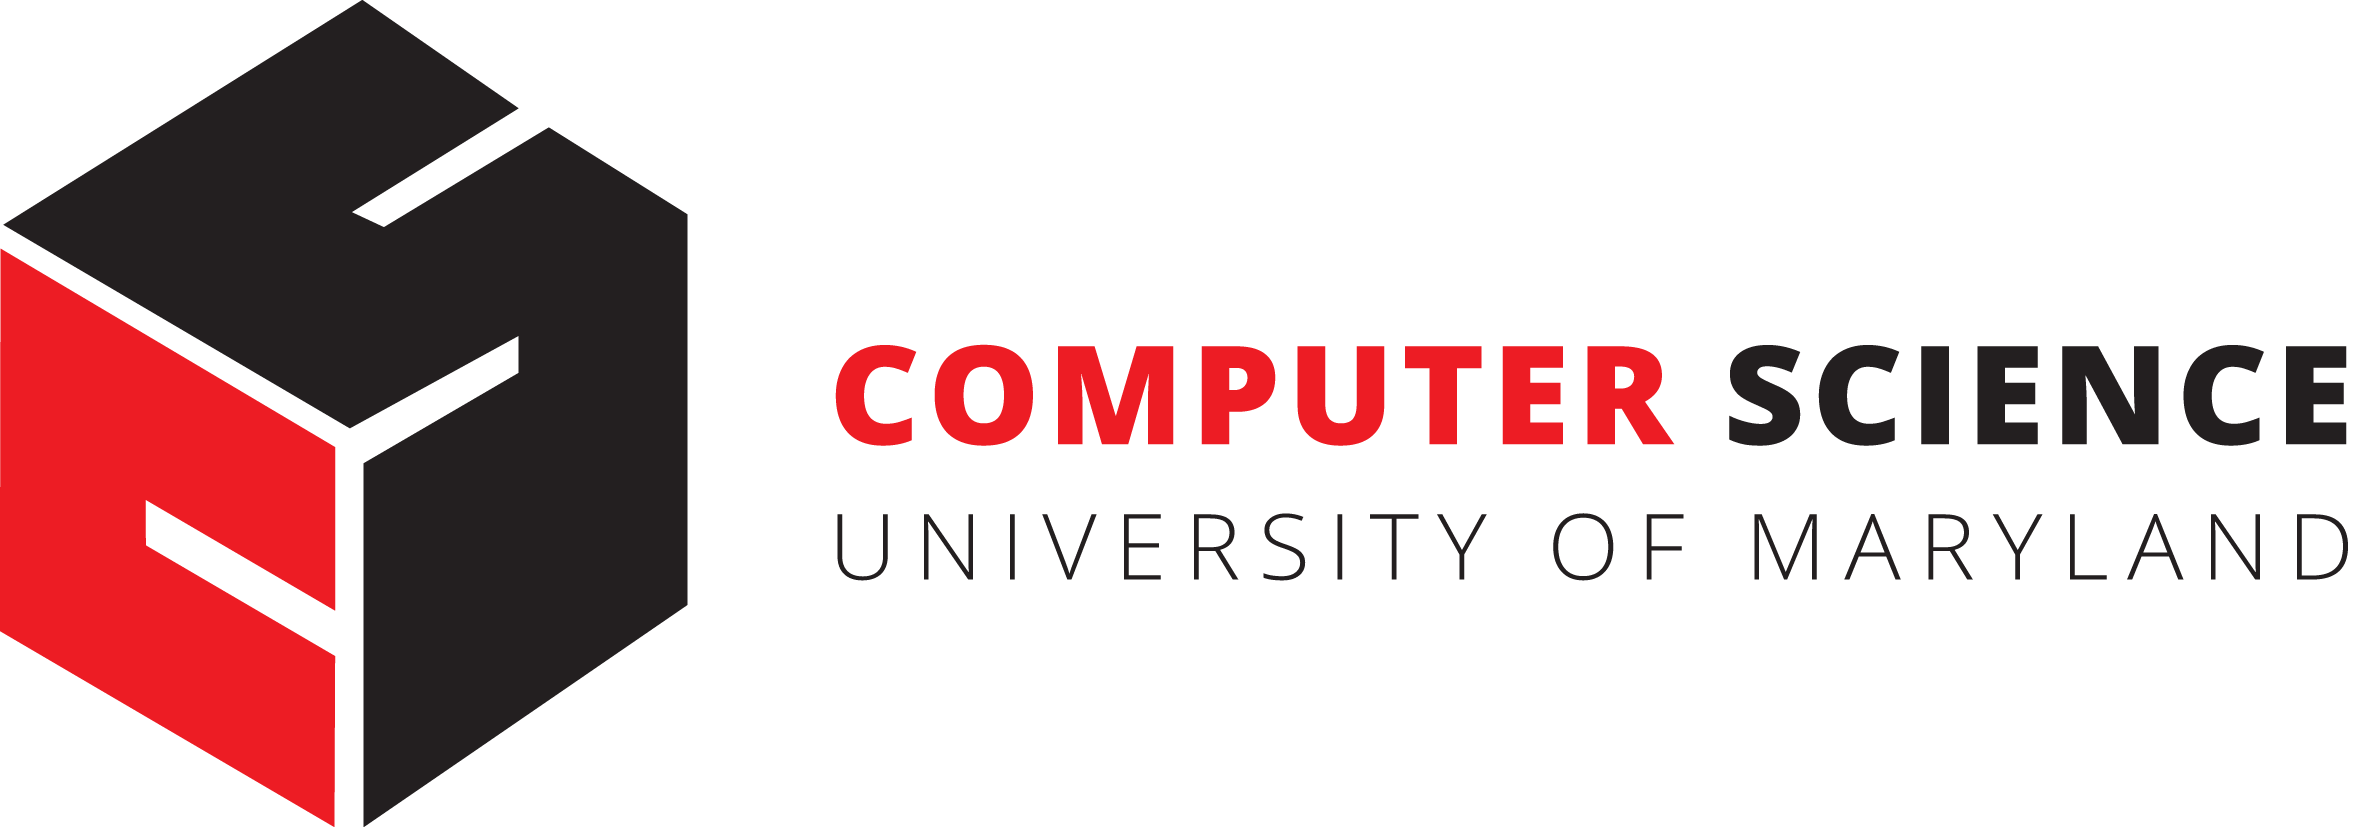 University of Maryland Department of Computer Science